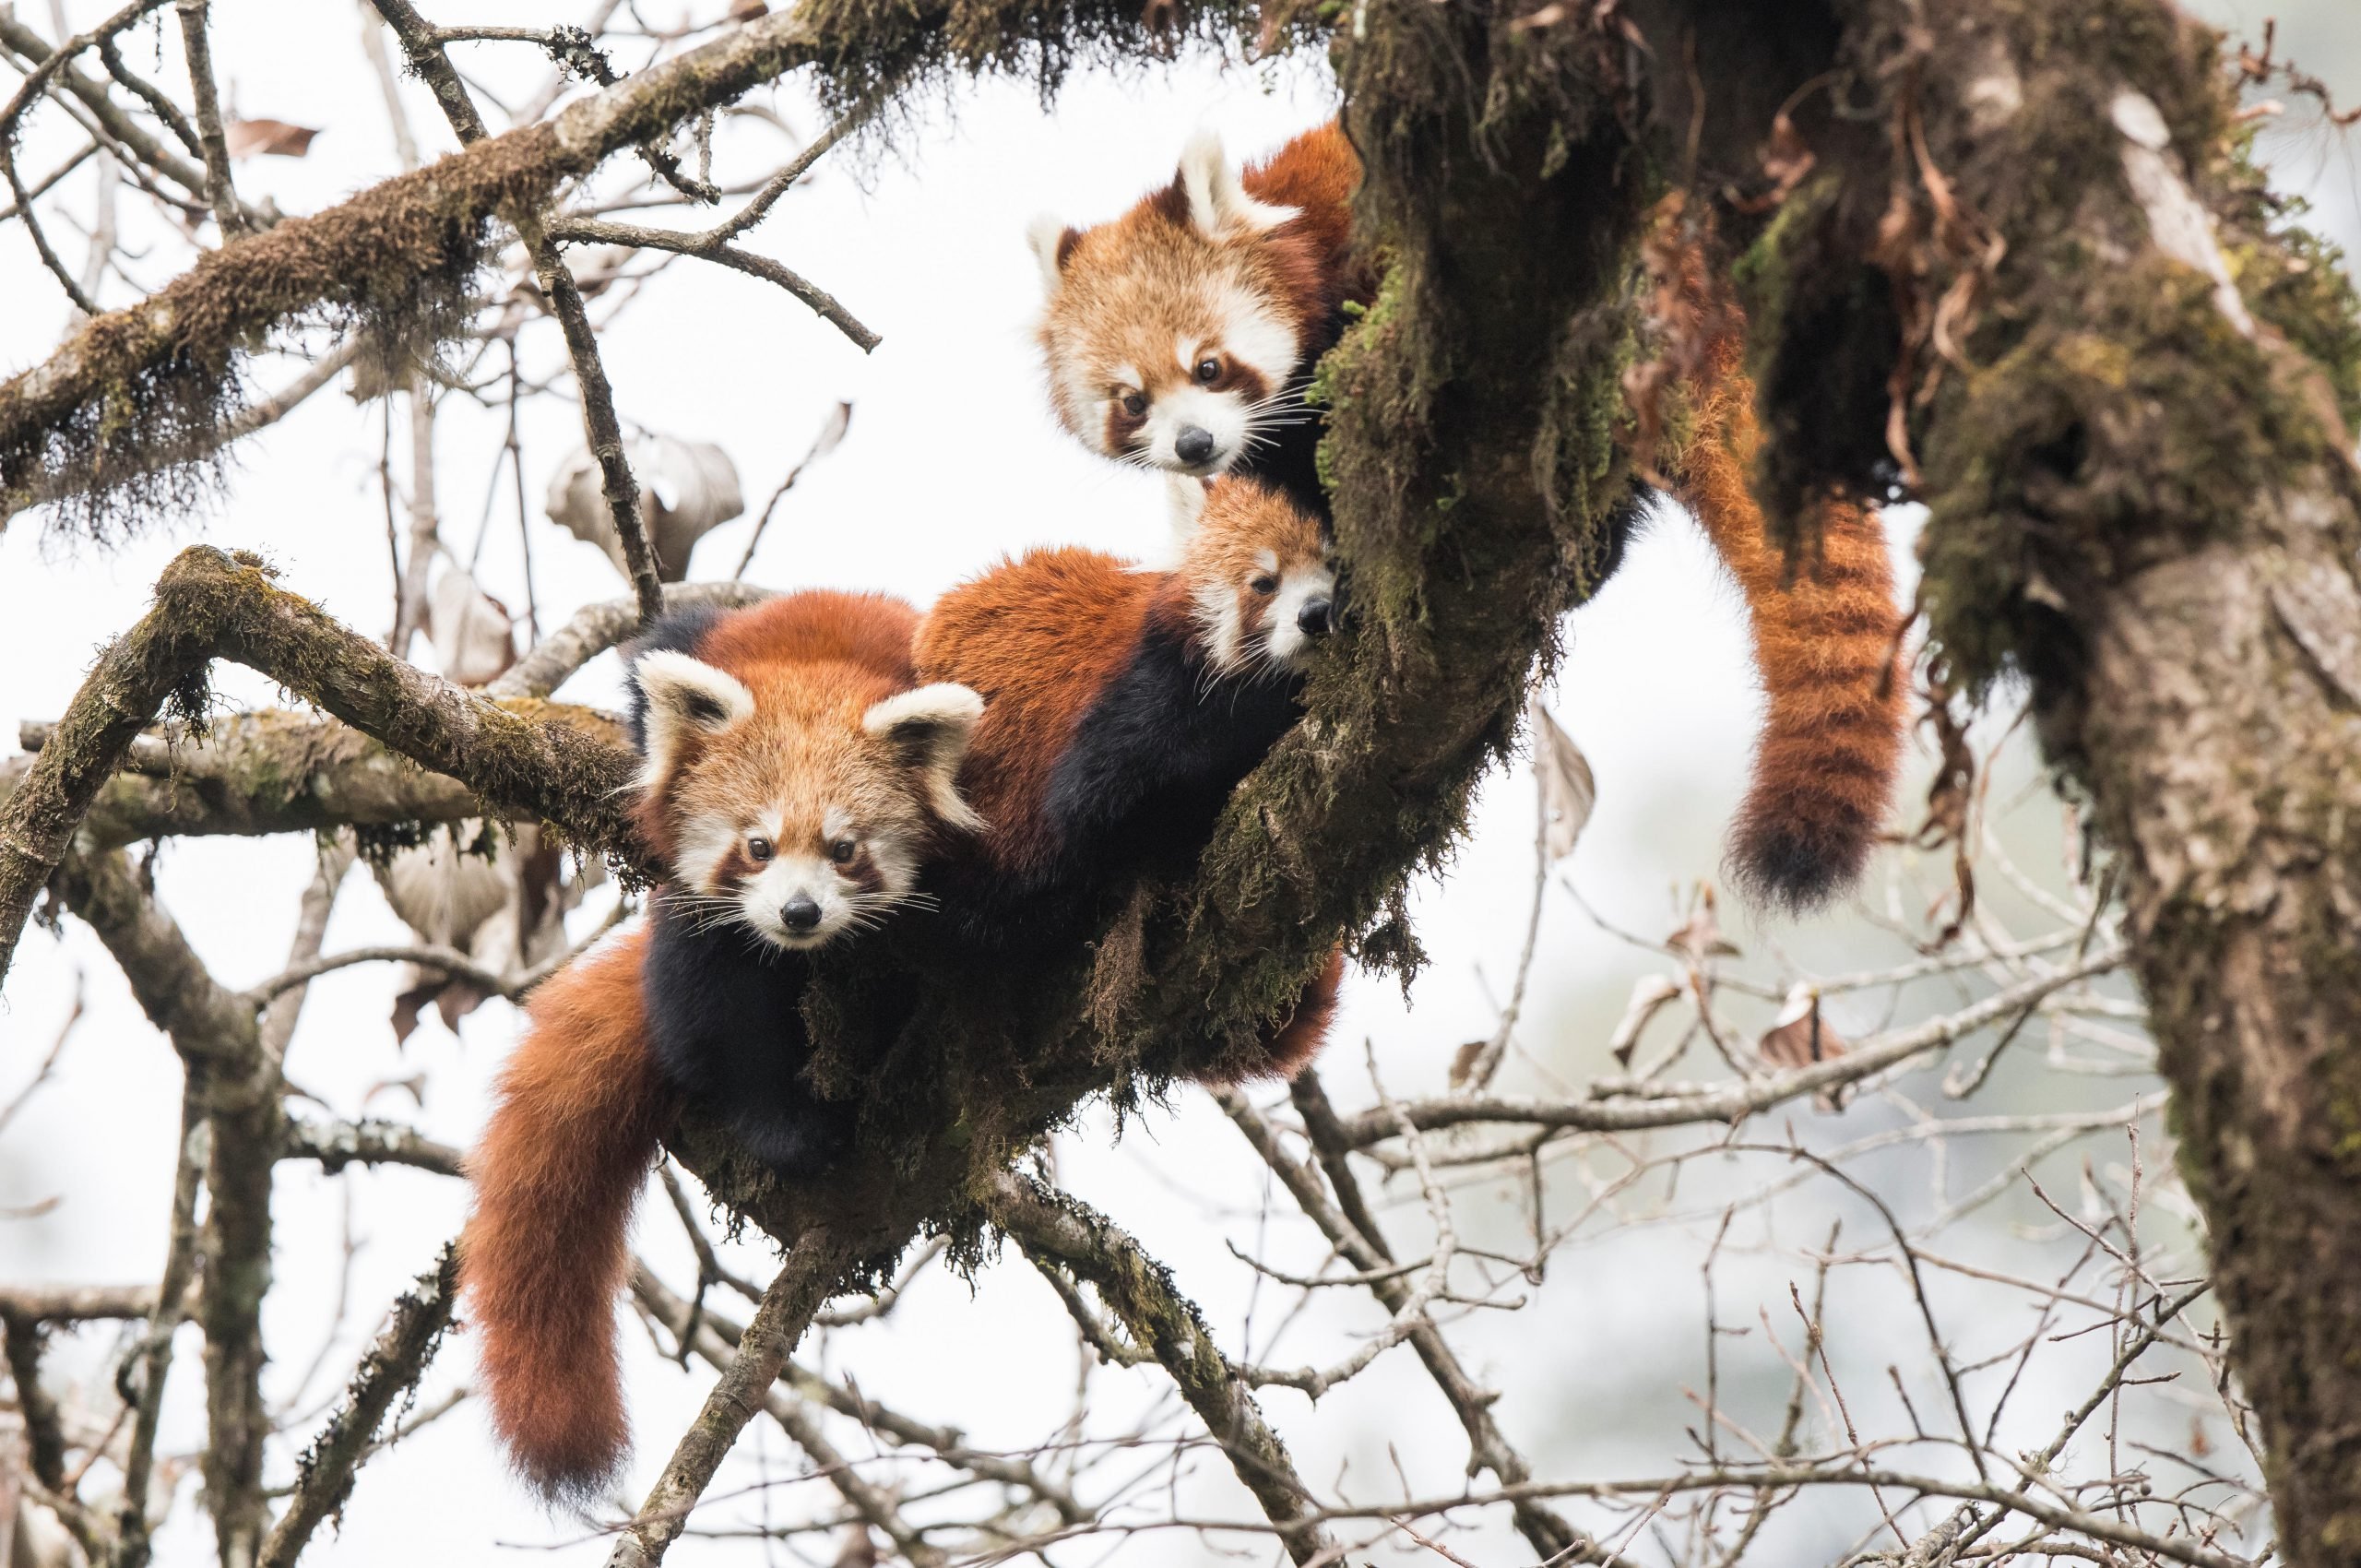 Red pandas and pangolins: Without communities, conservation fails in  eastern Himalayas | The Third Pole